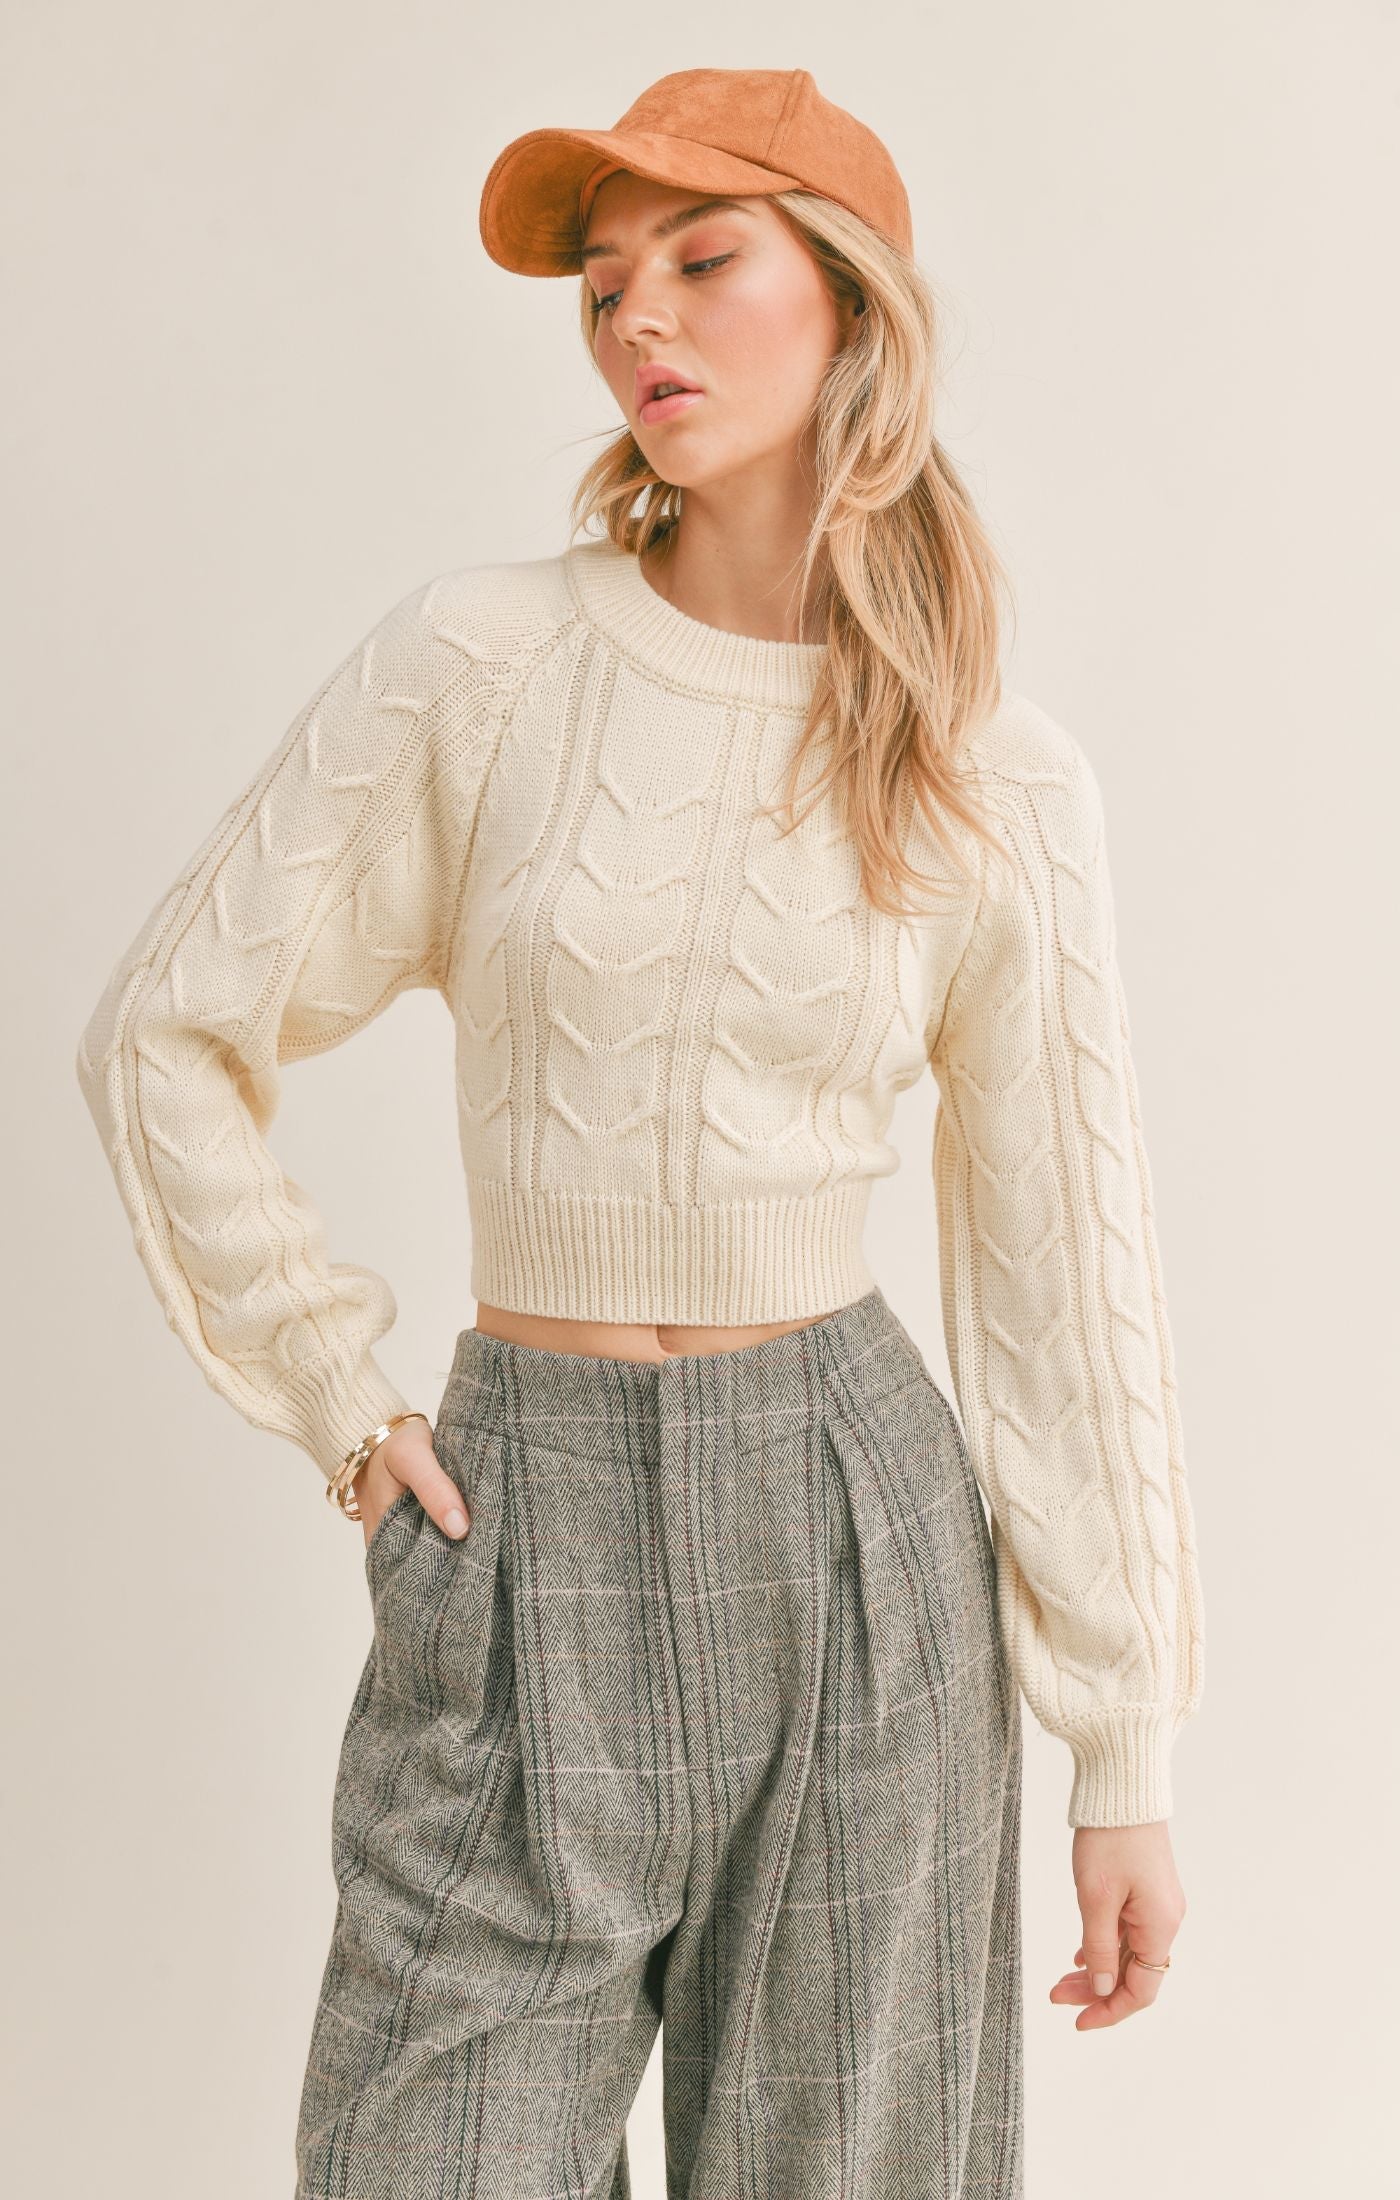 Sage The Label, Remind You Not Backless Sweater in Off White - Boutique Dandelion